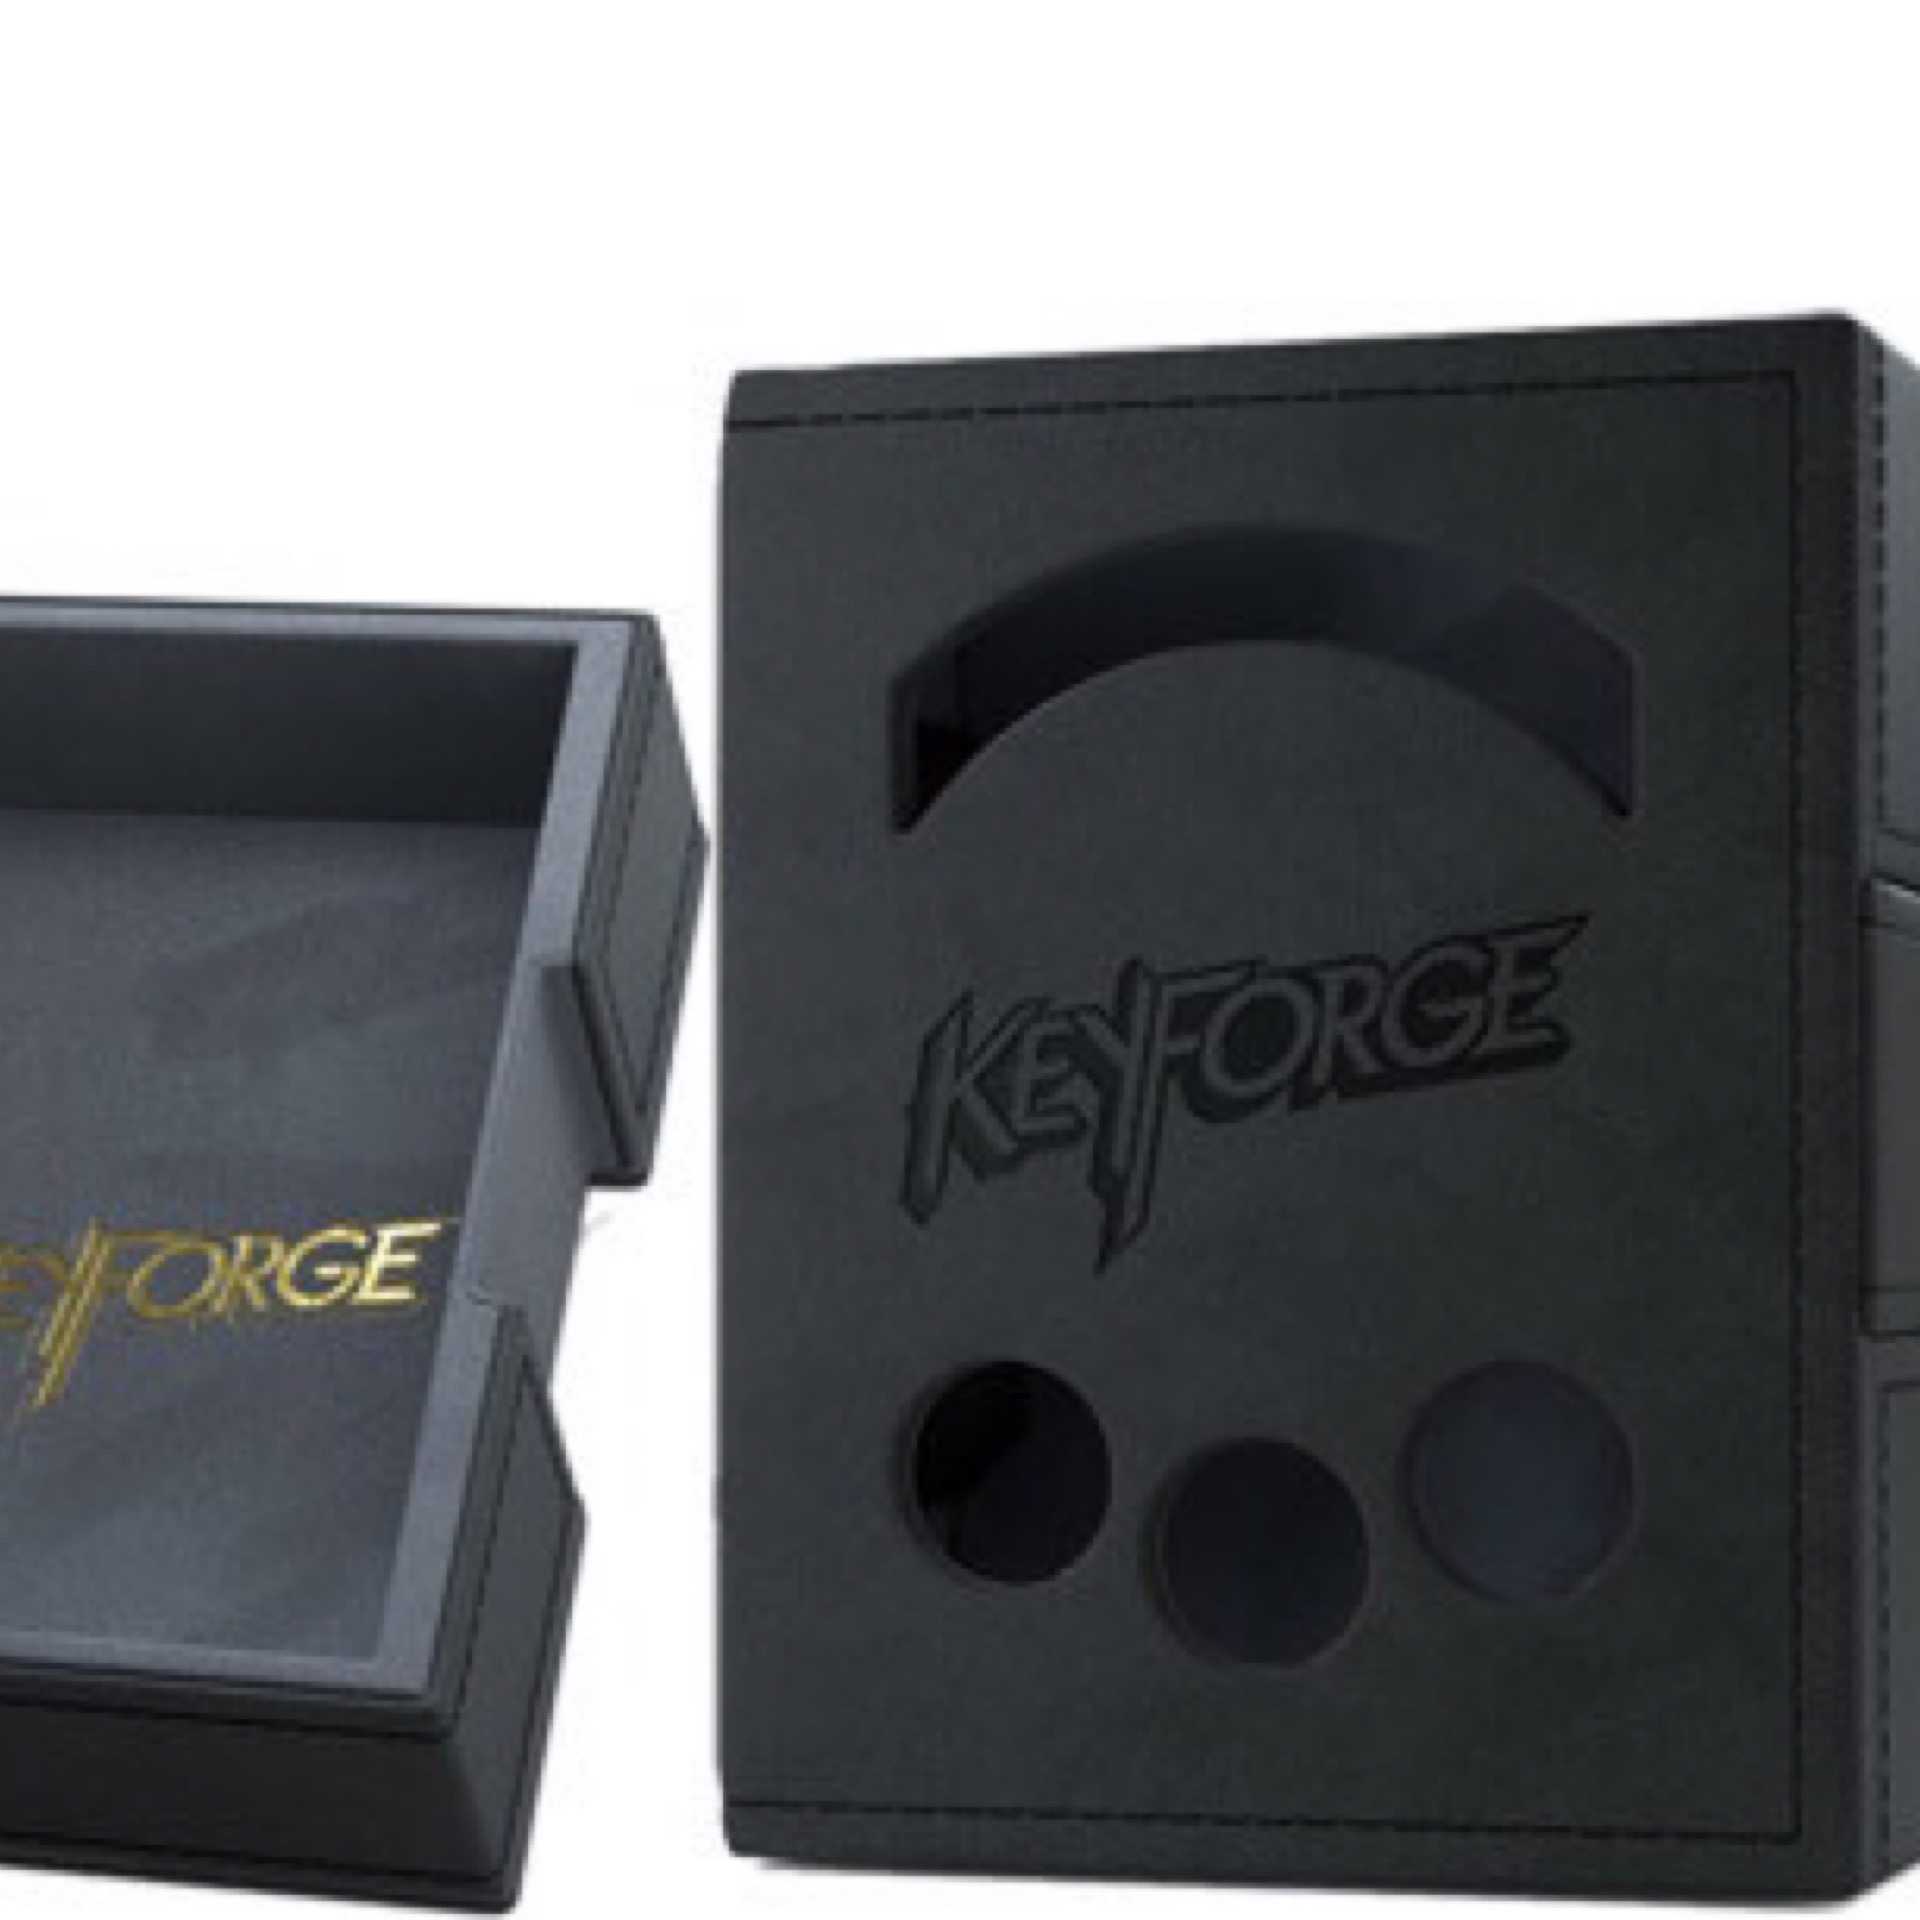 Durable Compact KeyForge Accessories Innovative Black Deck Book 